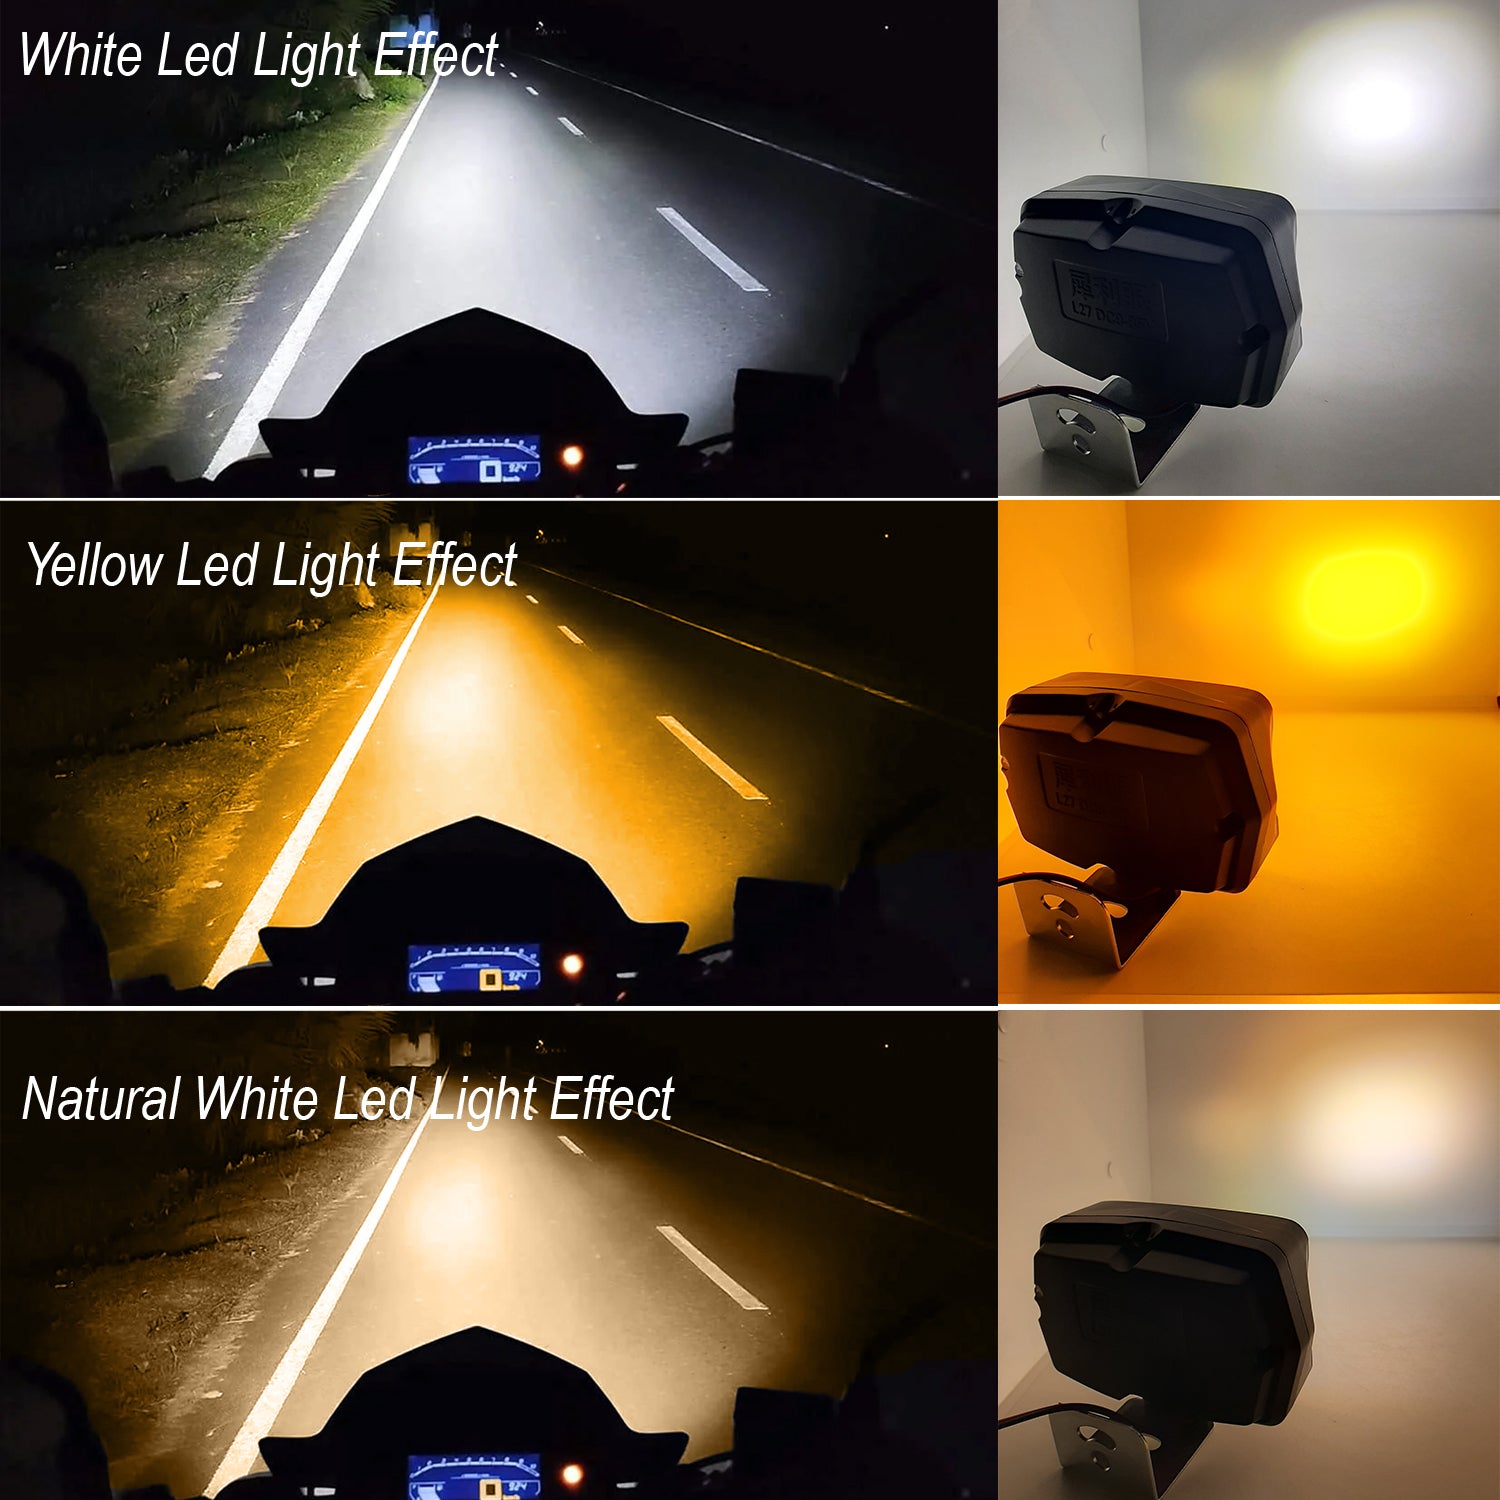 AUTOPOWERZ (21LED) Waterproof Auxiliary Light Anti-Fog Spot Light for All Vehicles,Two Wheeler,Bikes,Cars - Pack of 1